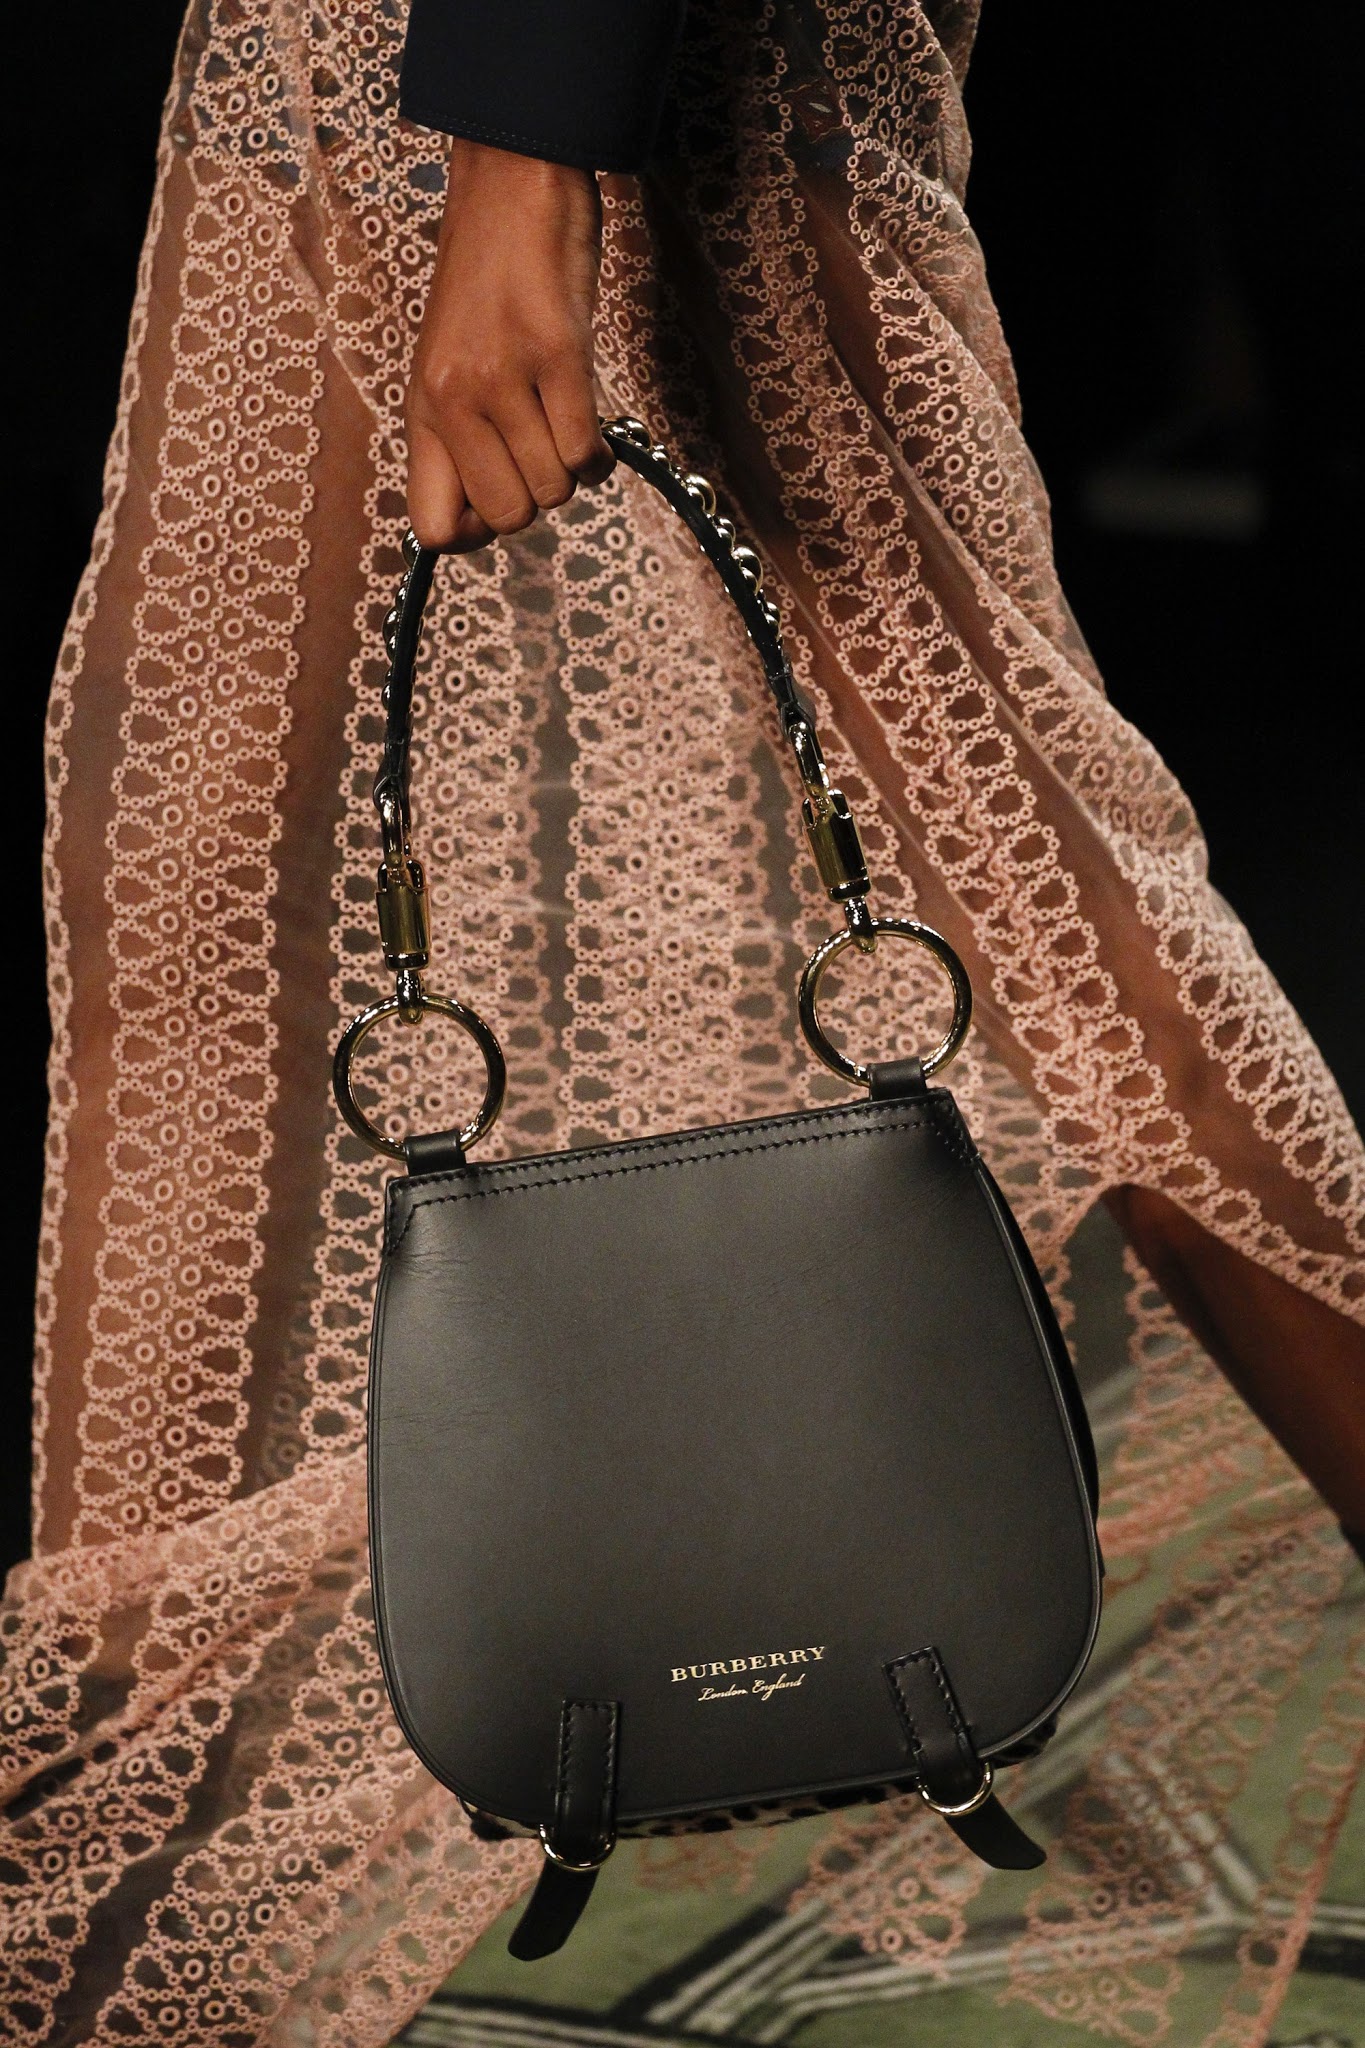 #LFW: Burberry September Collection Runway and Bags Report